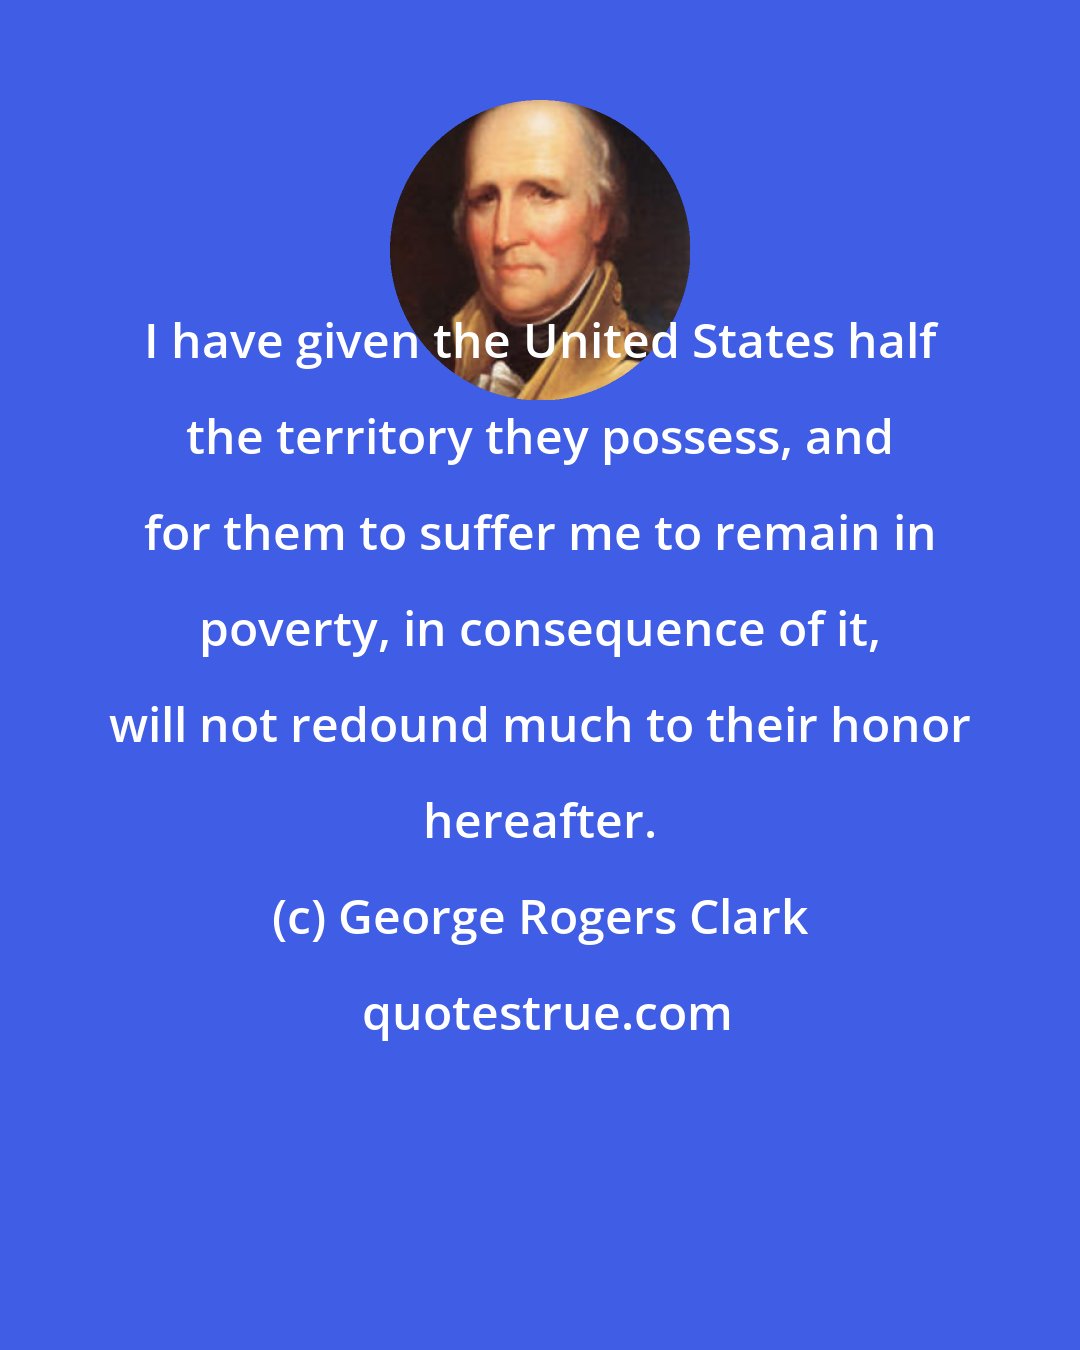 George Rogers Clark: I have given the United States half the territory they possess, and for them to suffer me to remain in poverty, in consequence of it, will not redound much to their honor hereafter.